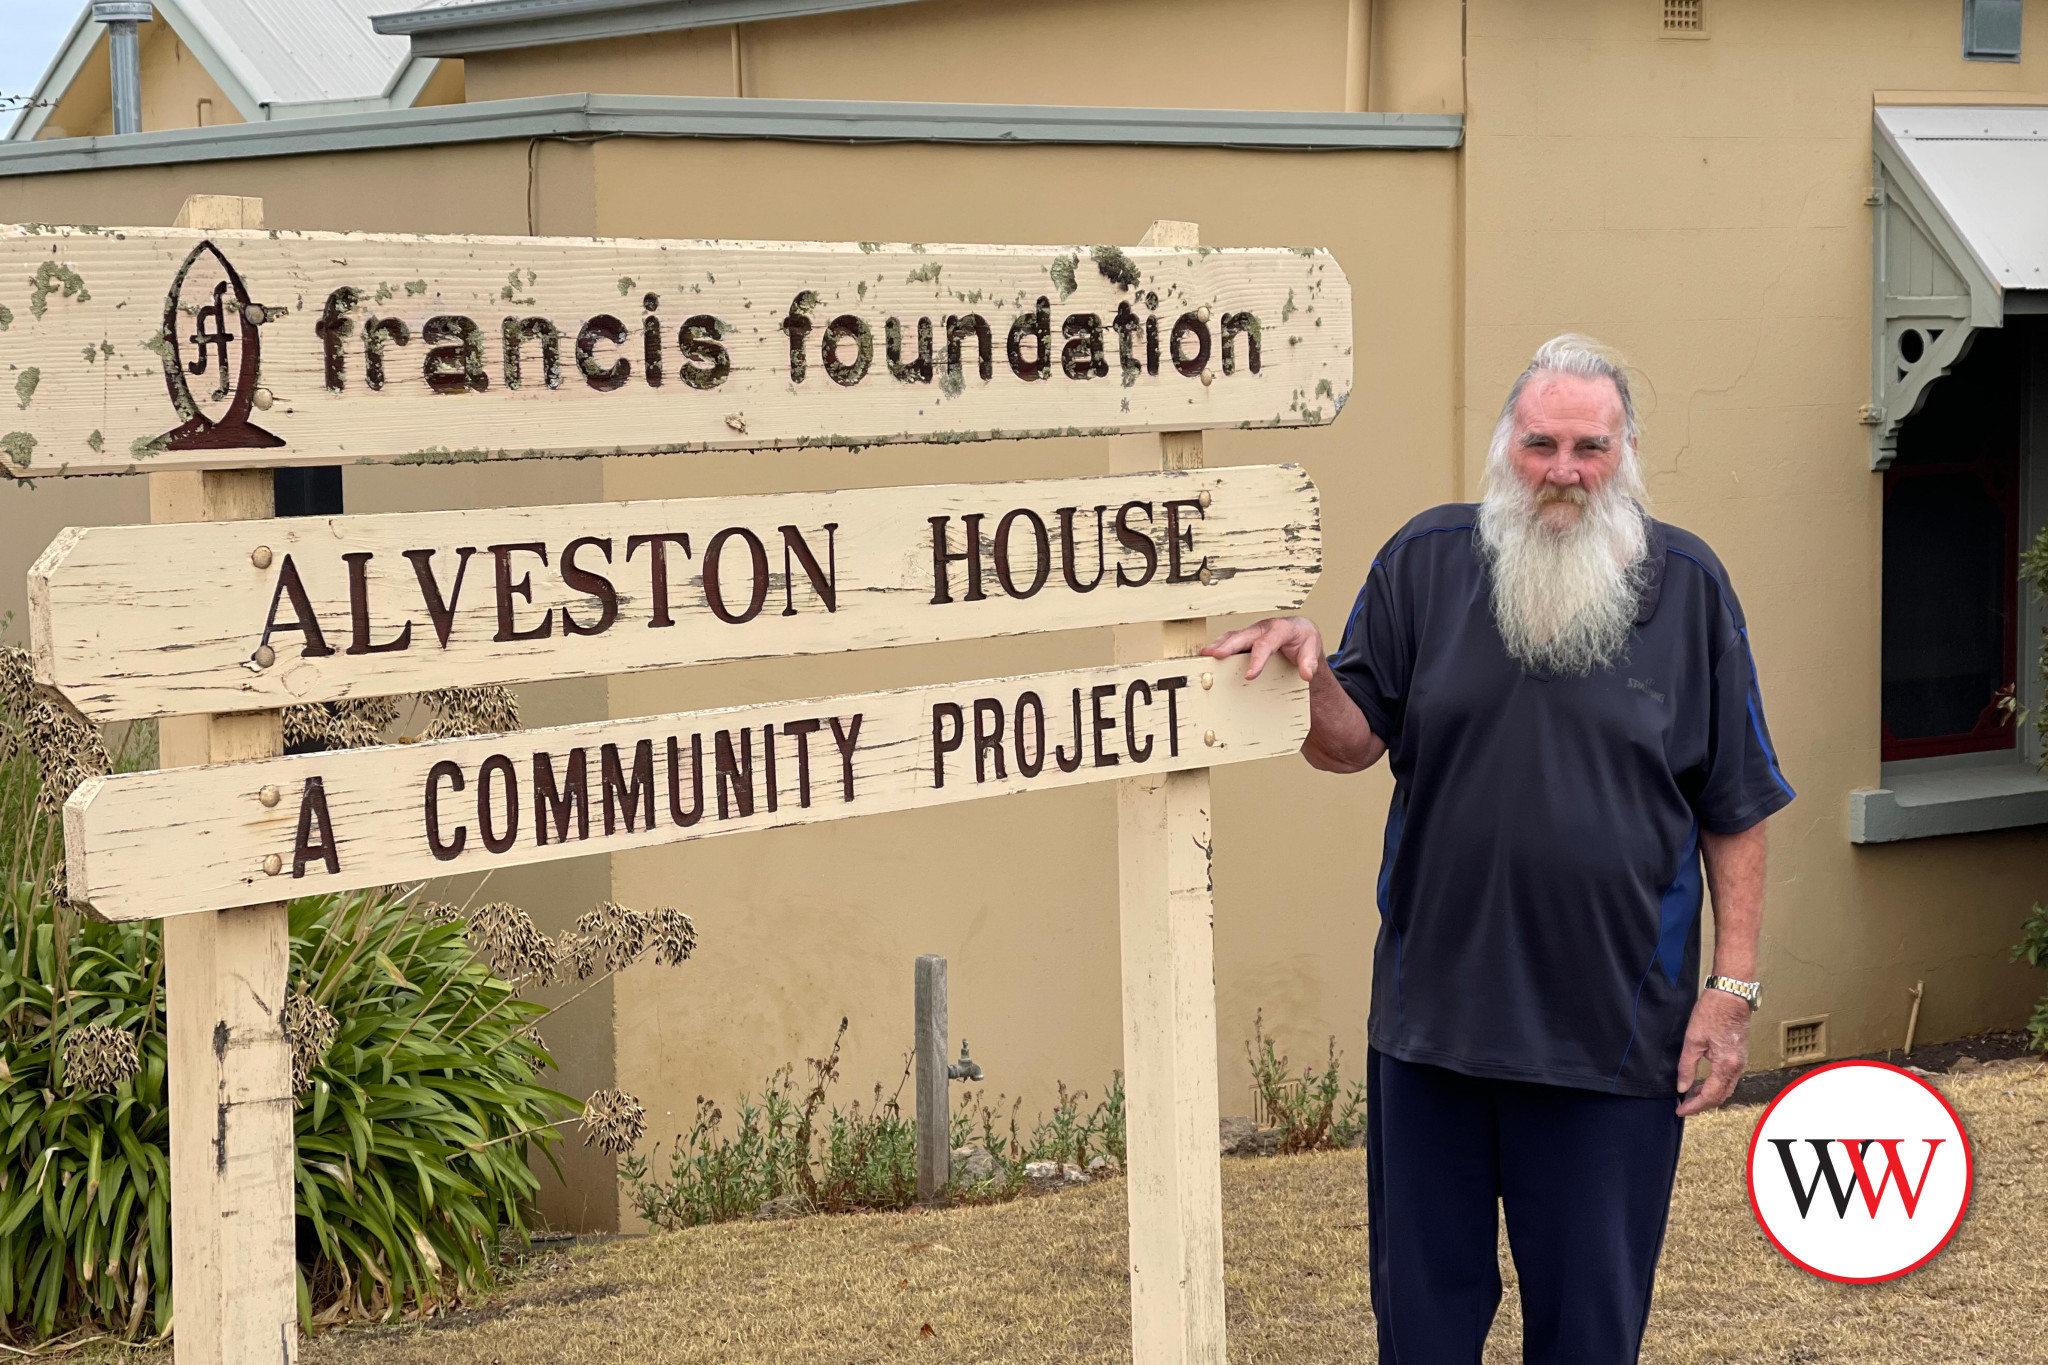 Warrnambool’s Alveston House relies on funds raised at its Op Shop in Port Fairy to continue providing accommodation for the homeless or those at risk of homelessness. Volunteers such as Peter McMahon (pictured) are vital for this service but more are needed to ensure its future.